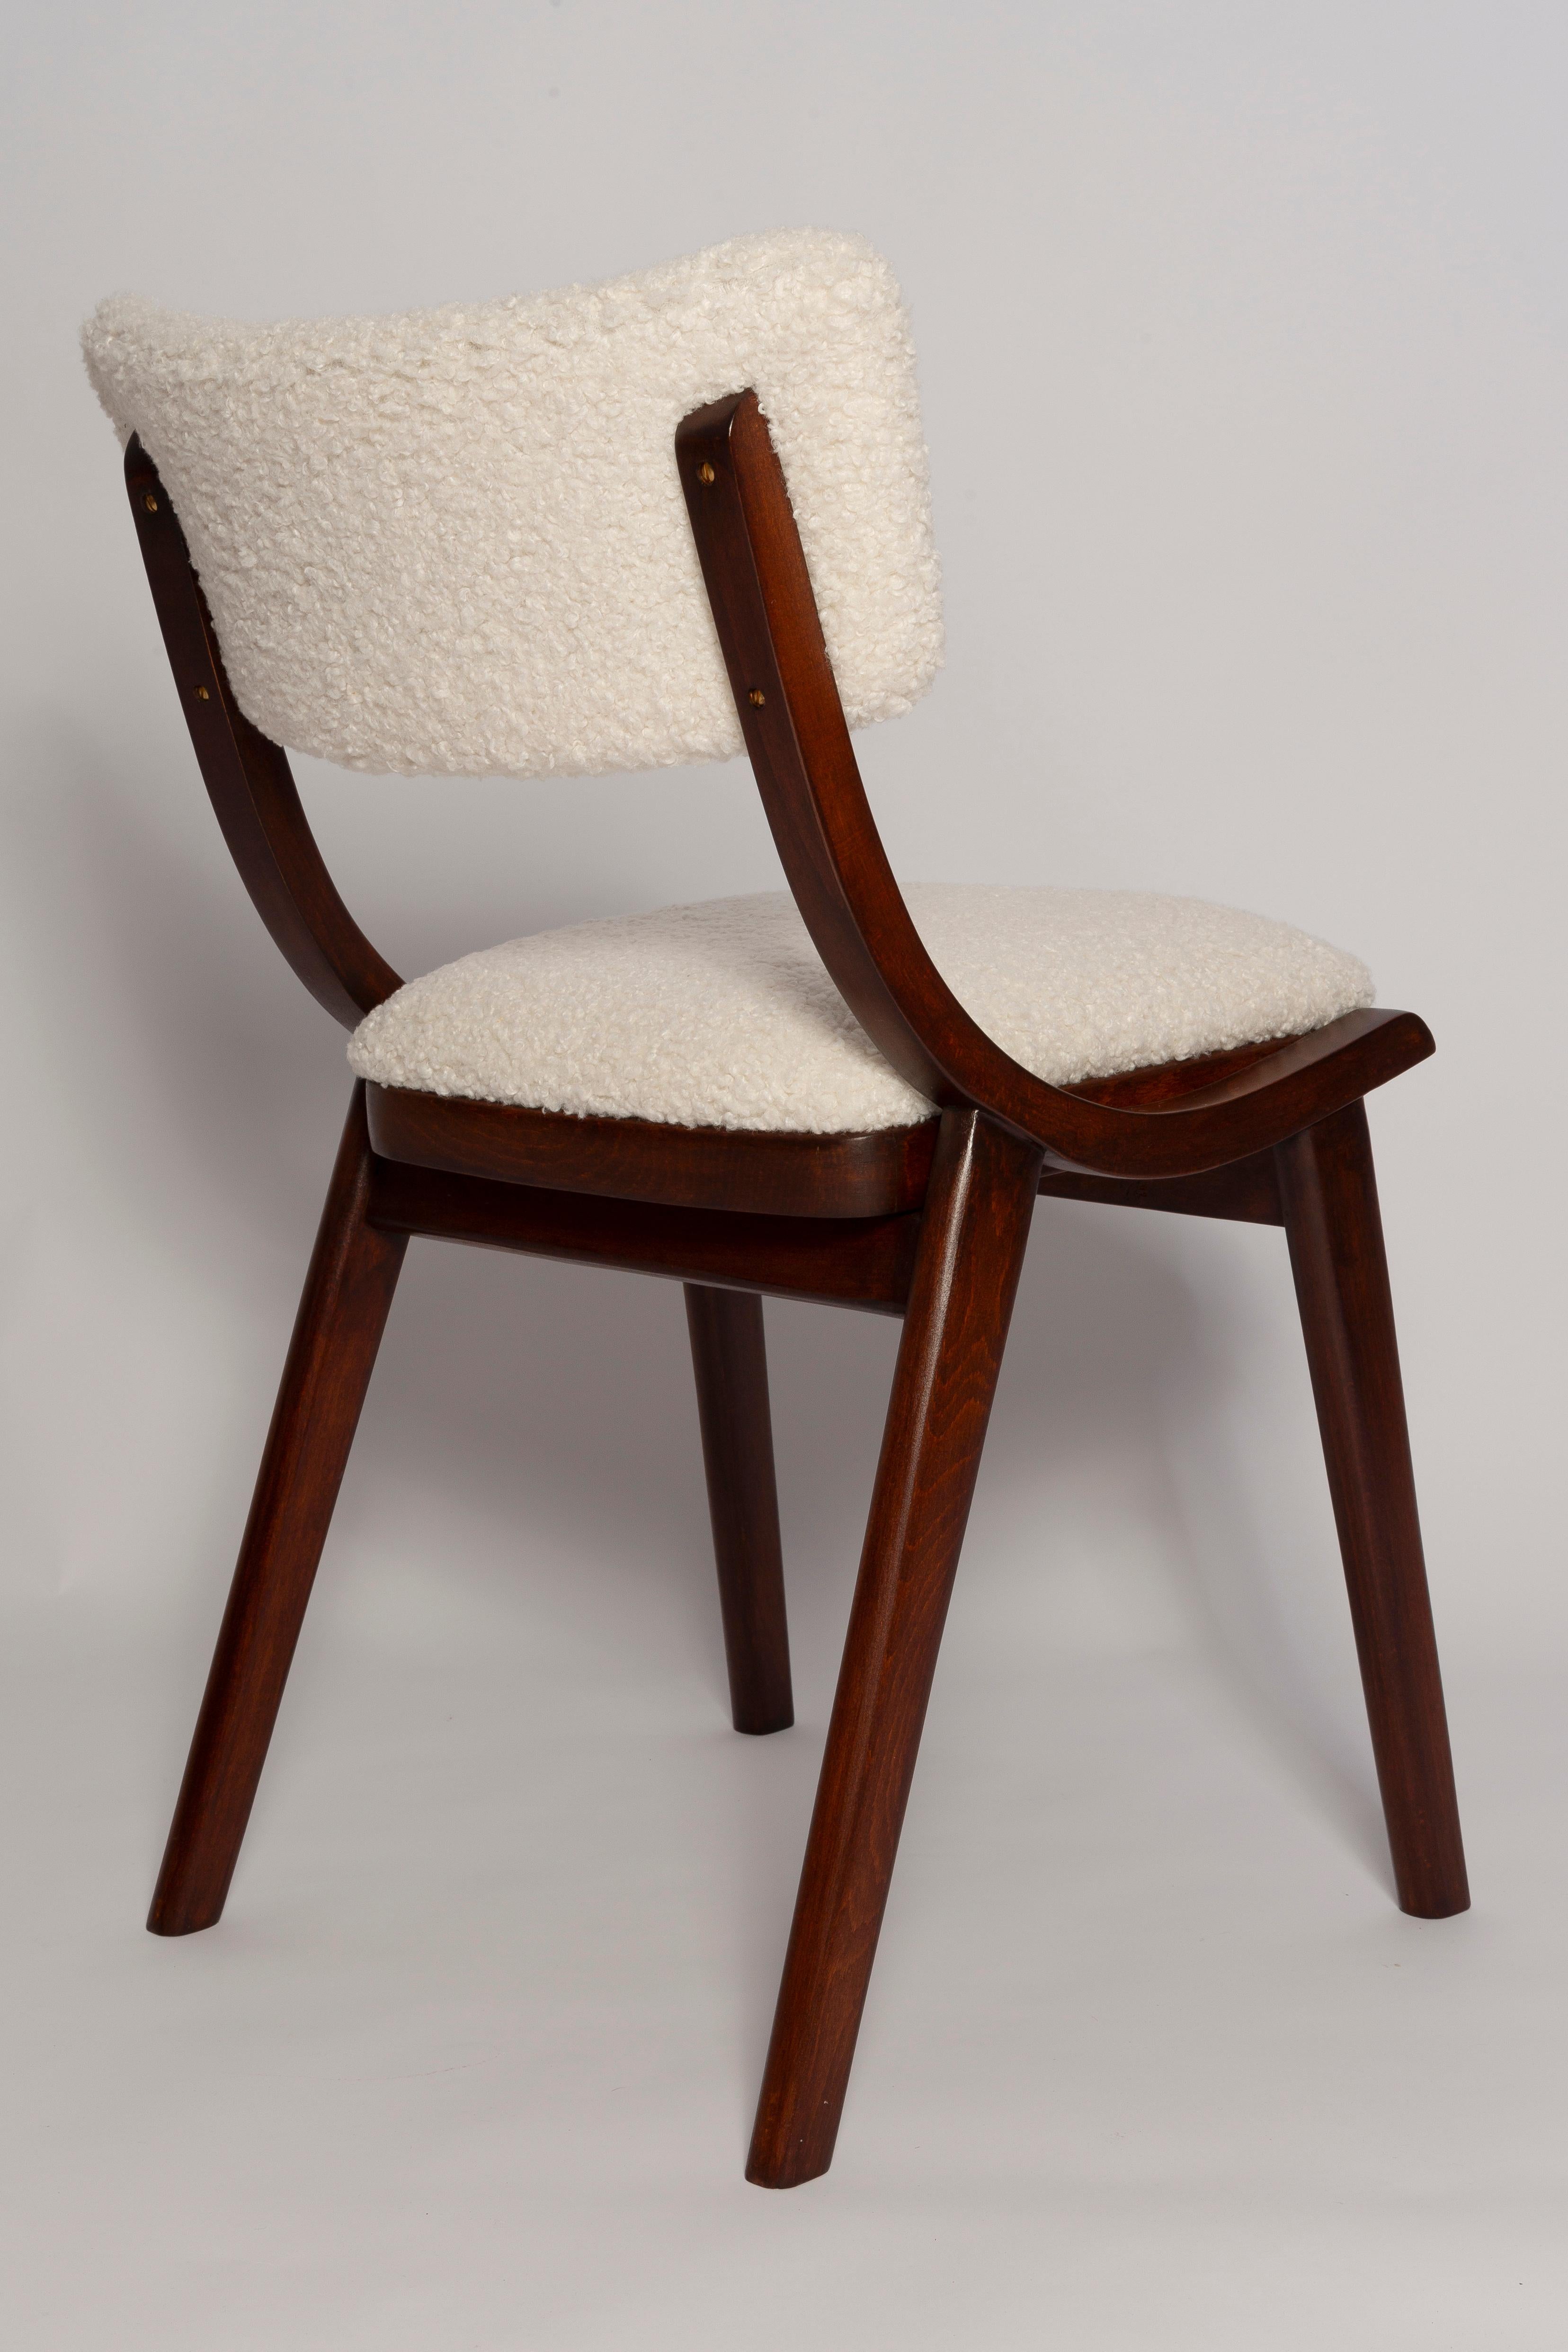 Hand-Crafted Ten Mid Century Modern Bumerang Chairs, Light Creme White Boucle, Poland, 1960s For Sale